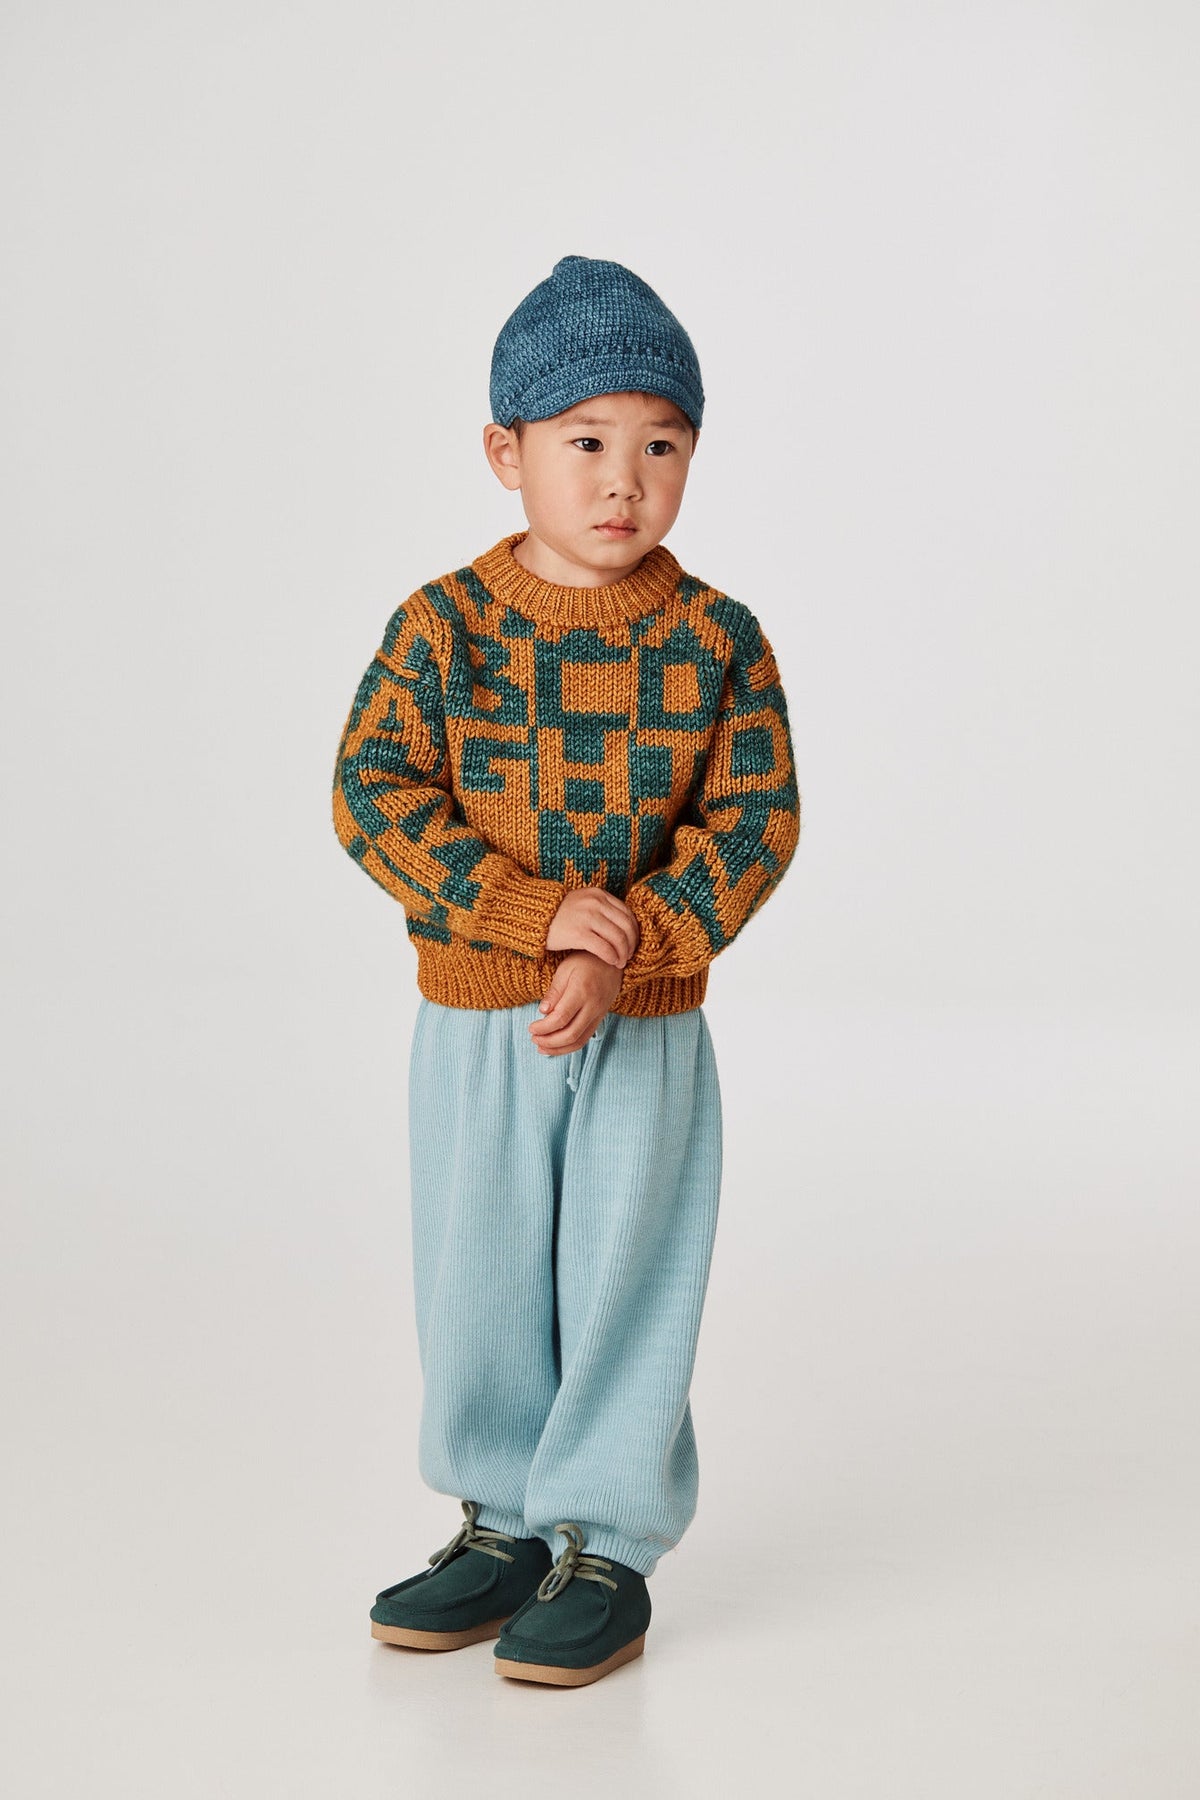 Alphabet Intarsia Sweater - Marigold+Model is 39 inches tall, 32lbs, wearing a size 3-4y